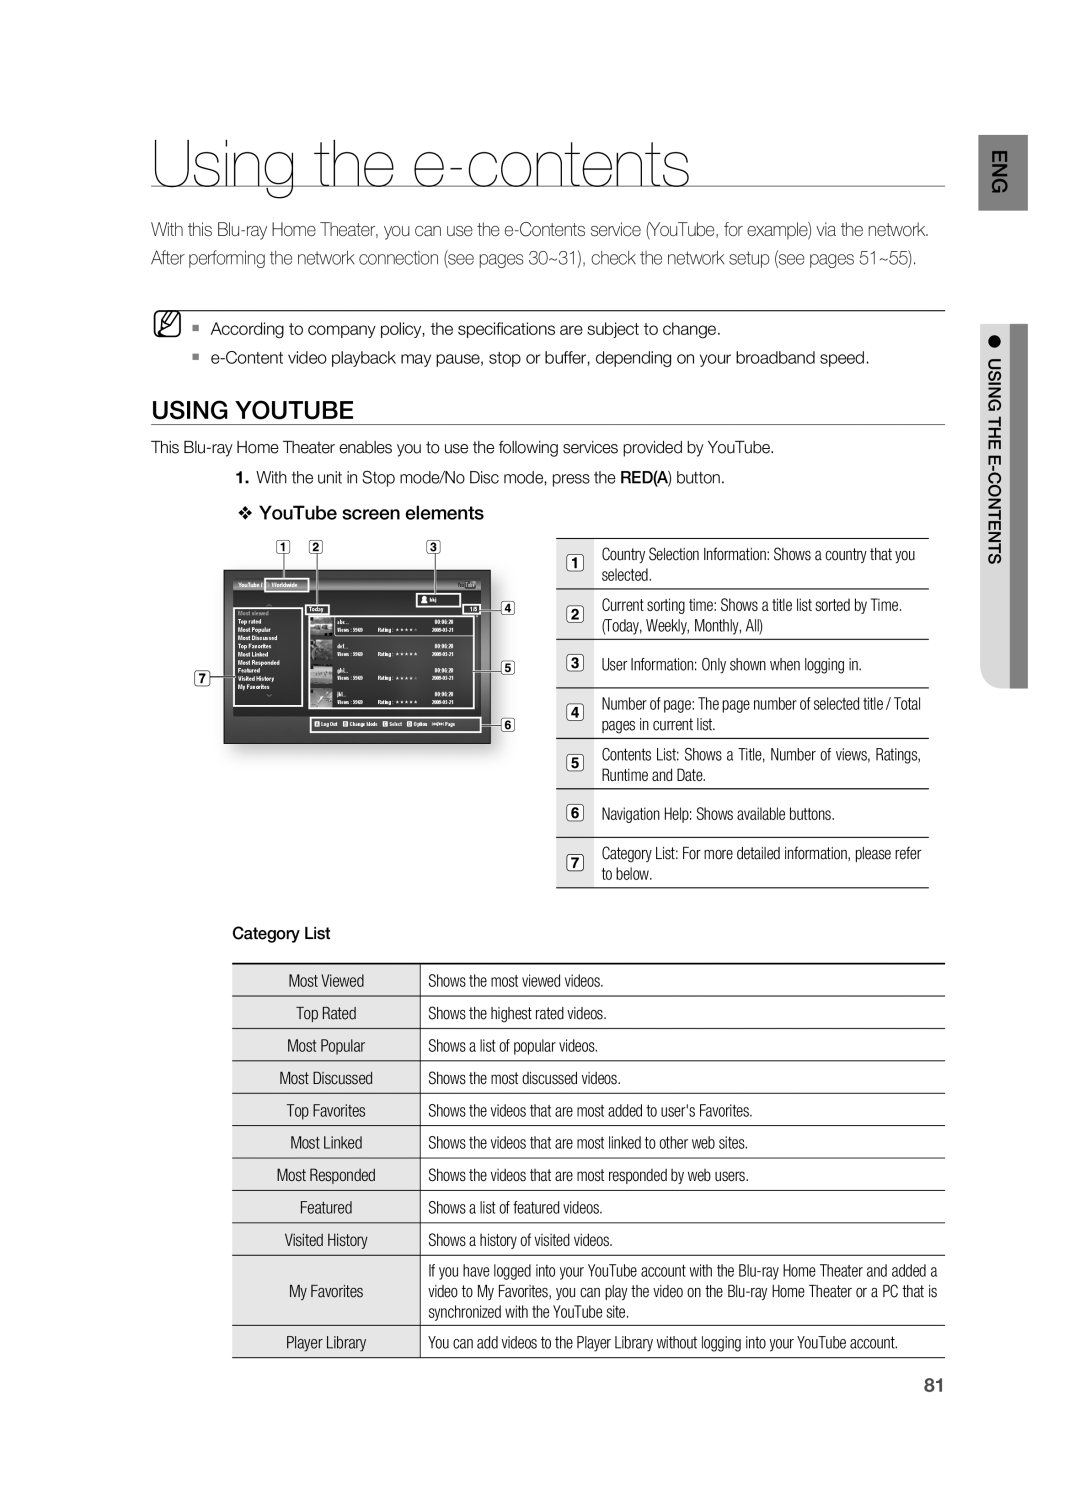 Samsung HT-BD1252, HT-BD1255 user manual Using the e-contents, Using Youtube, YouTube screen elements 